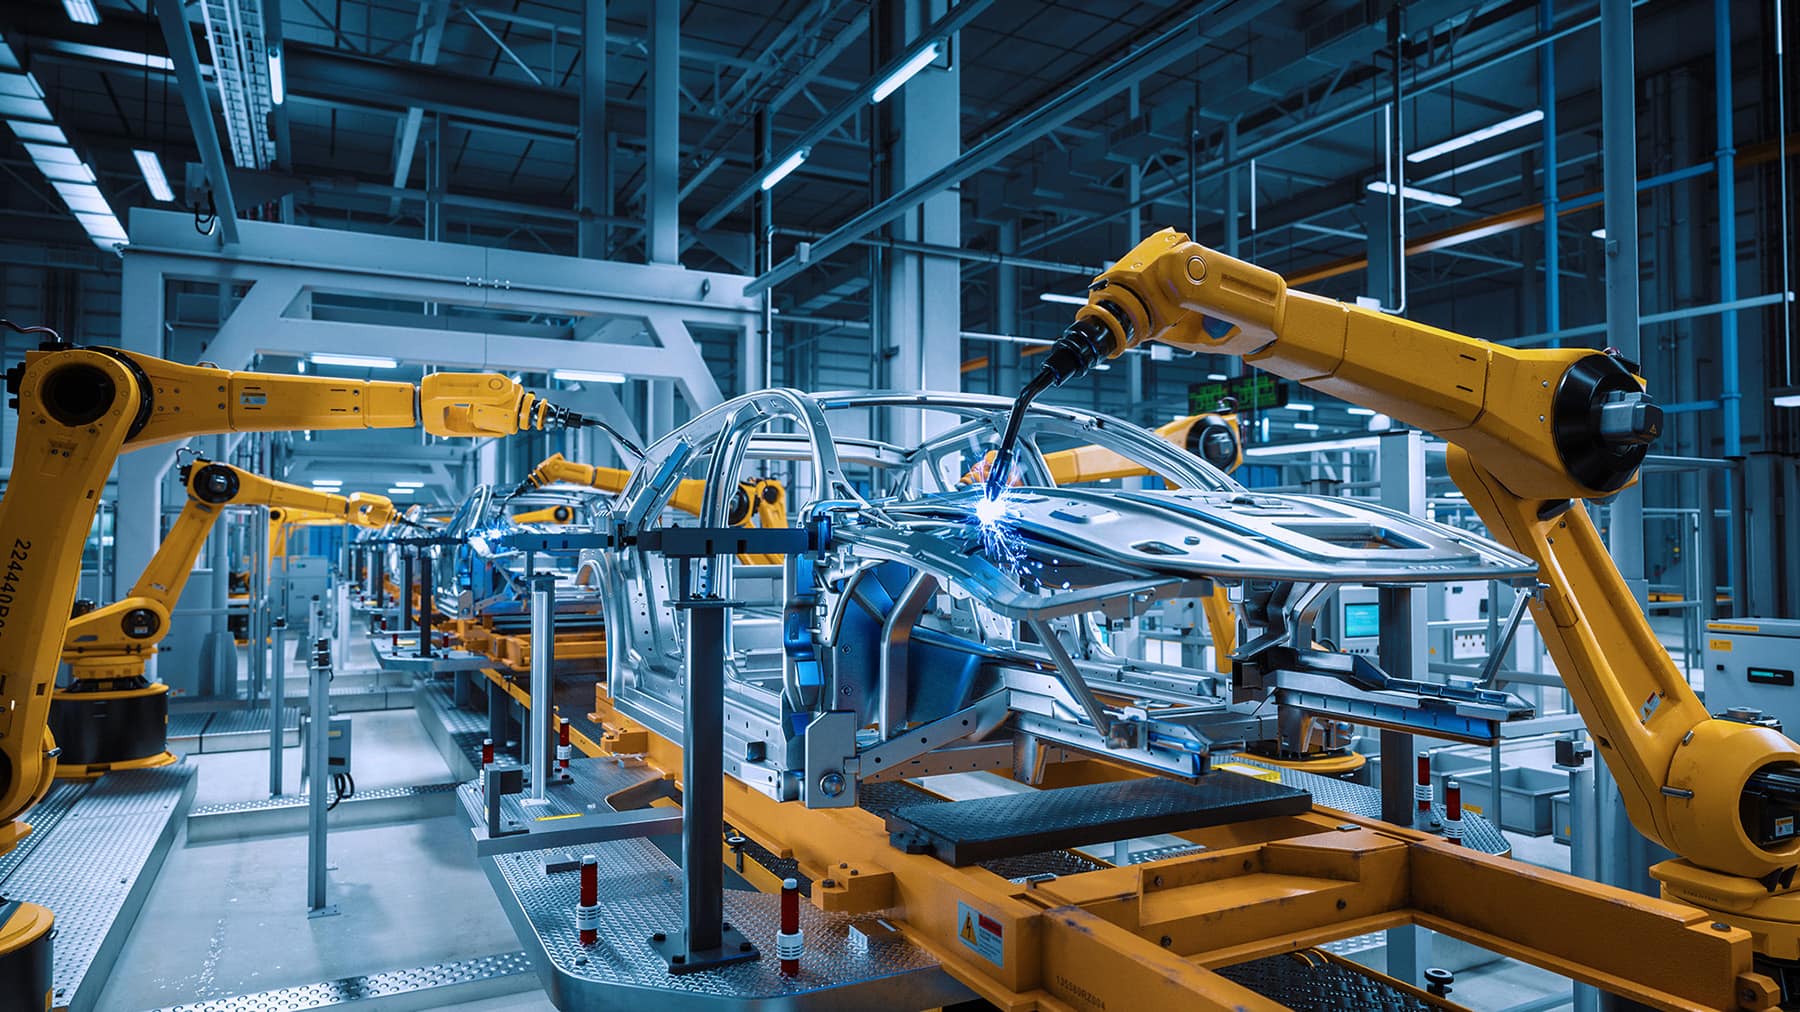 Robots working on a car assembly line in a factory.